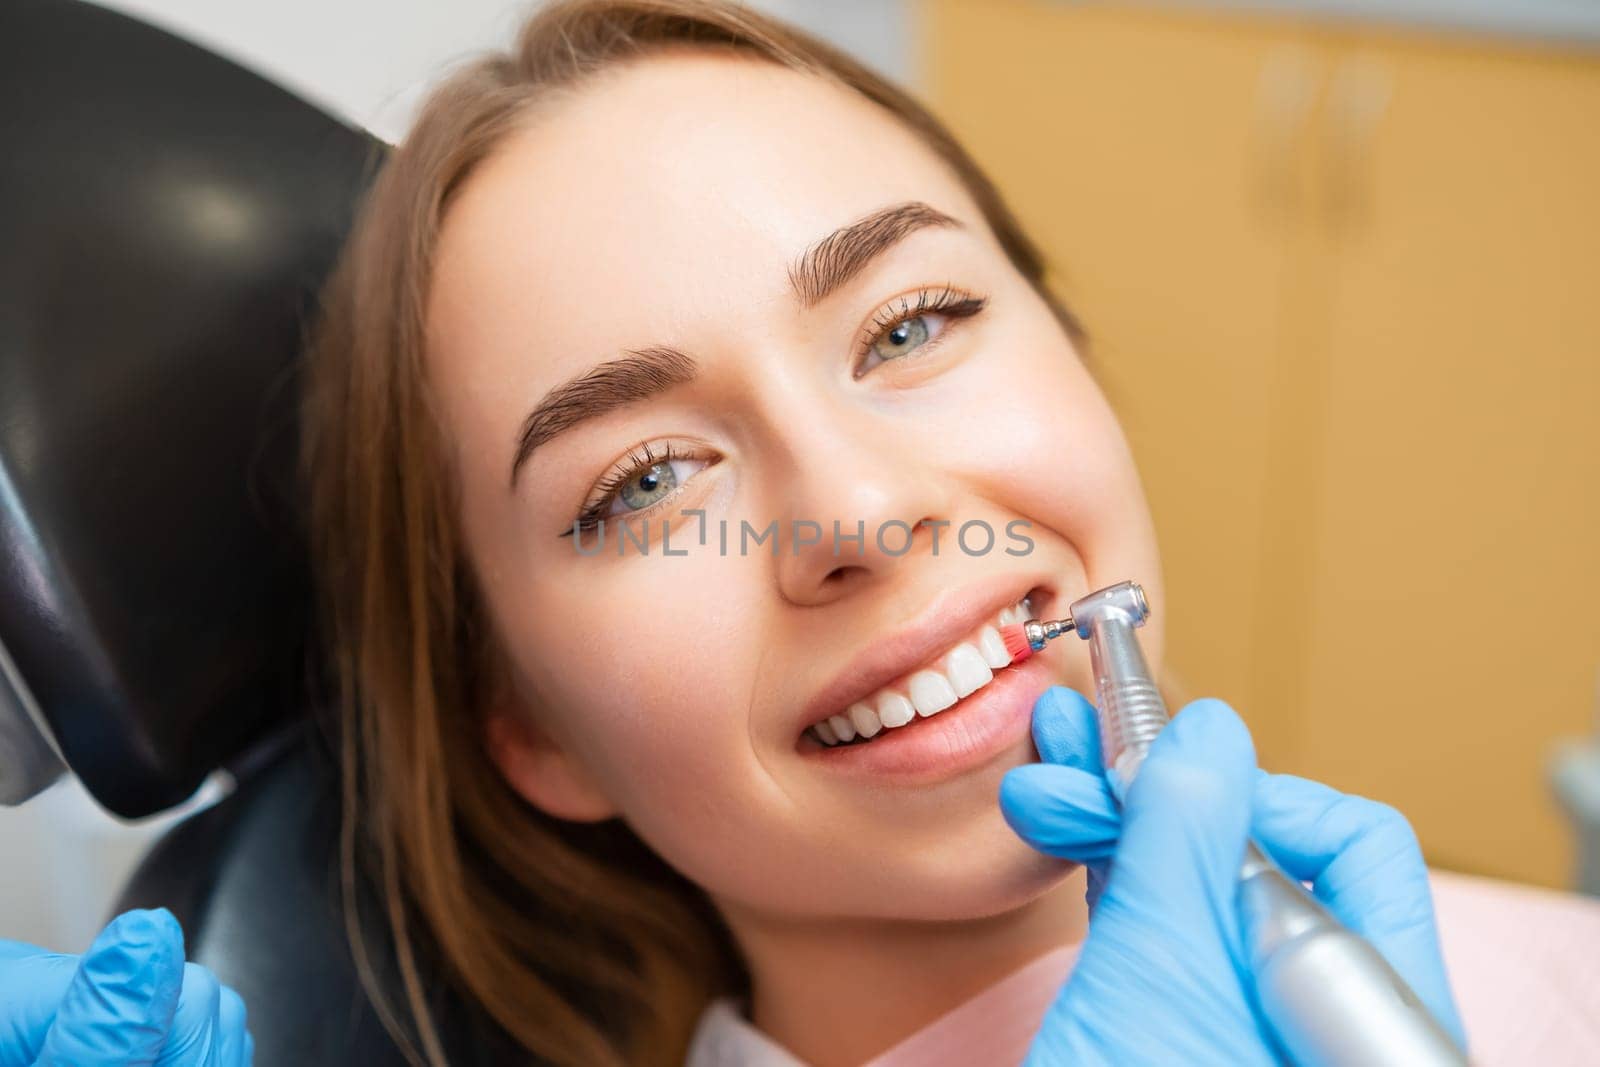 Dentist doing procedure of teeth grinding to beautiful woman in dental clinic.